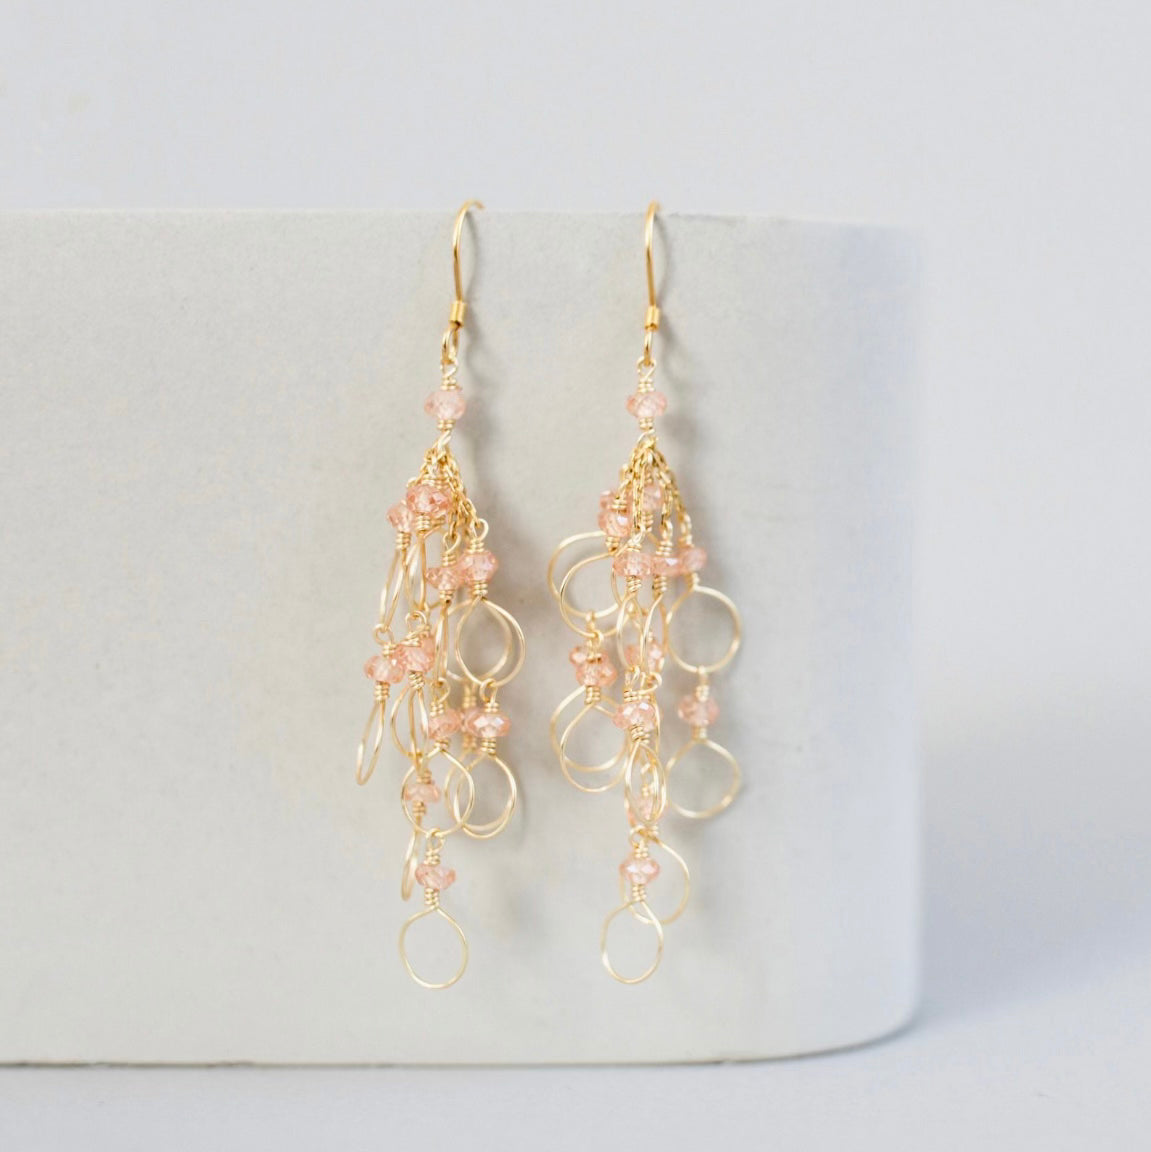 Elegant and Lightweight Design of Chain Loop Earrings with Champagne Quartz